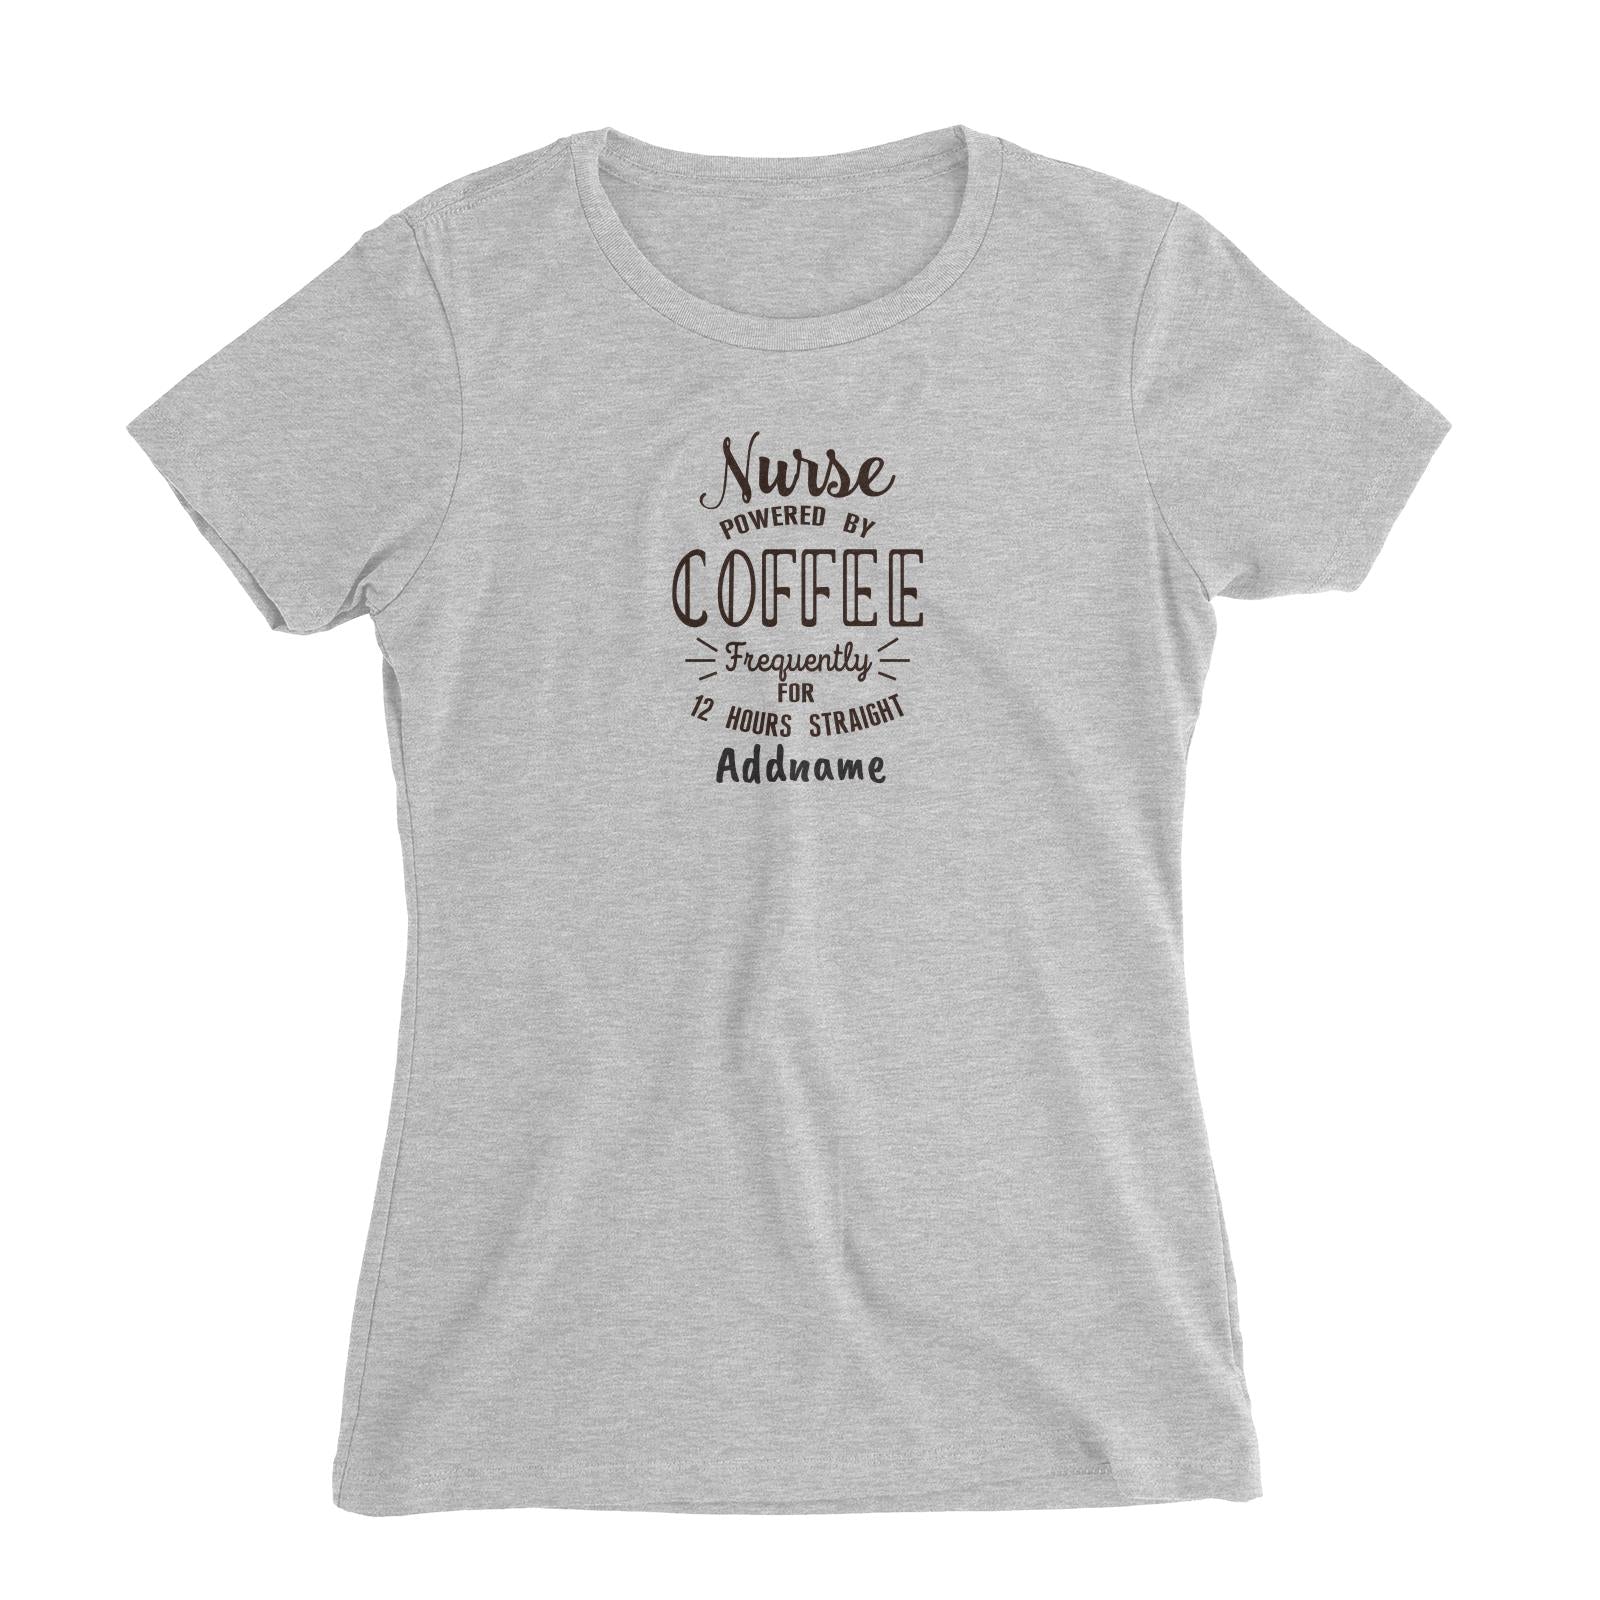 Nurse Powered By Coffee Frequently for 12 Hours Straight Women's Slim Fit T-Shirt